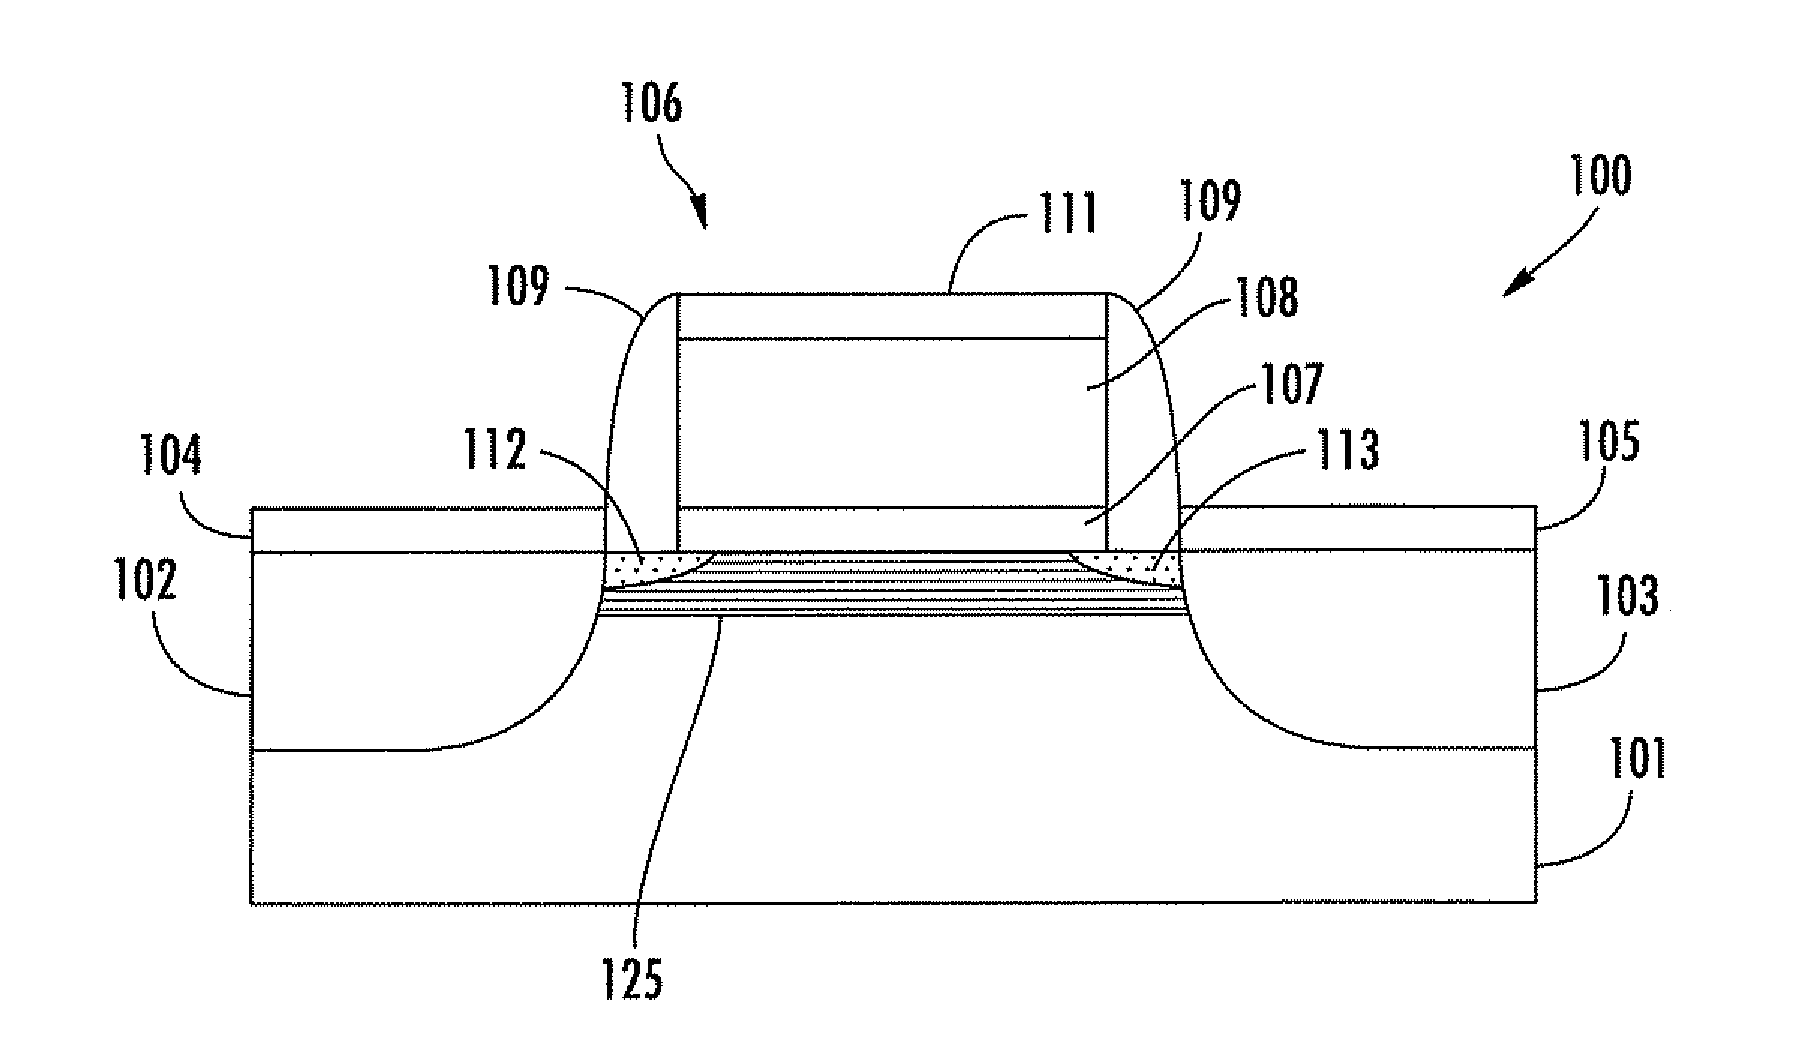 Semiconductor device including a superlattice and dopant diffusion retarding implants and related methods